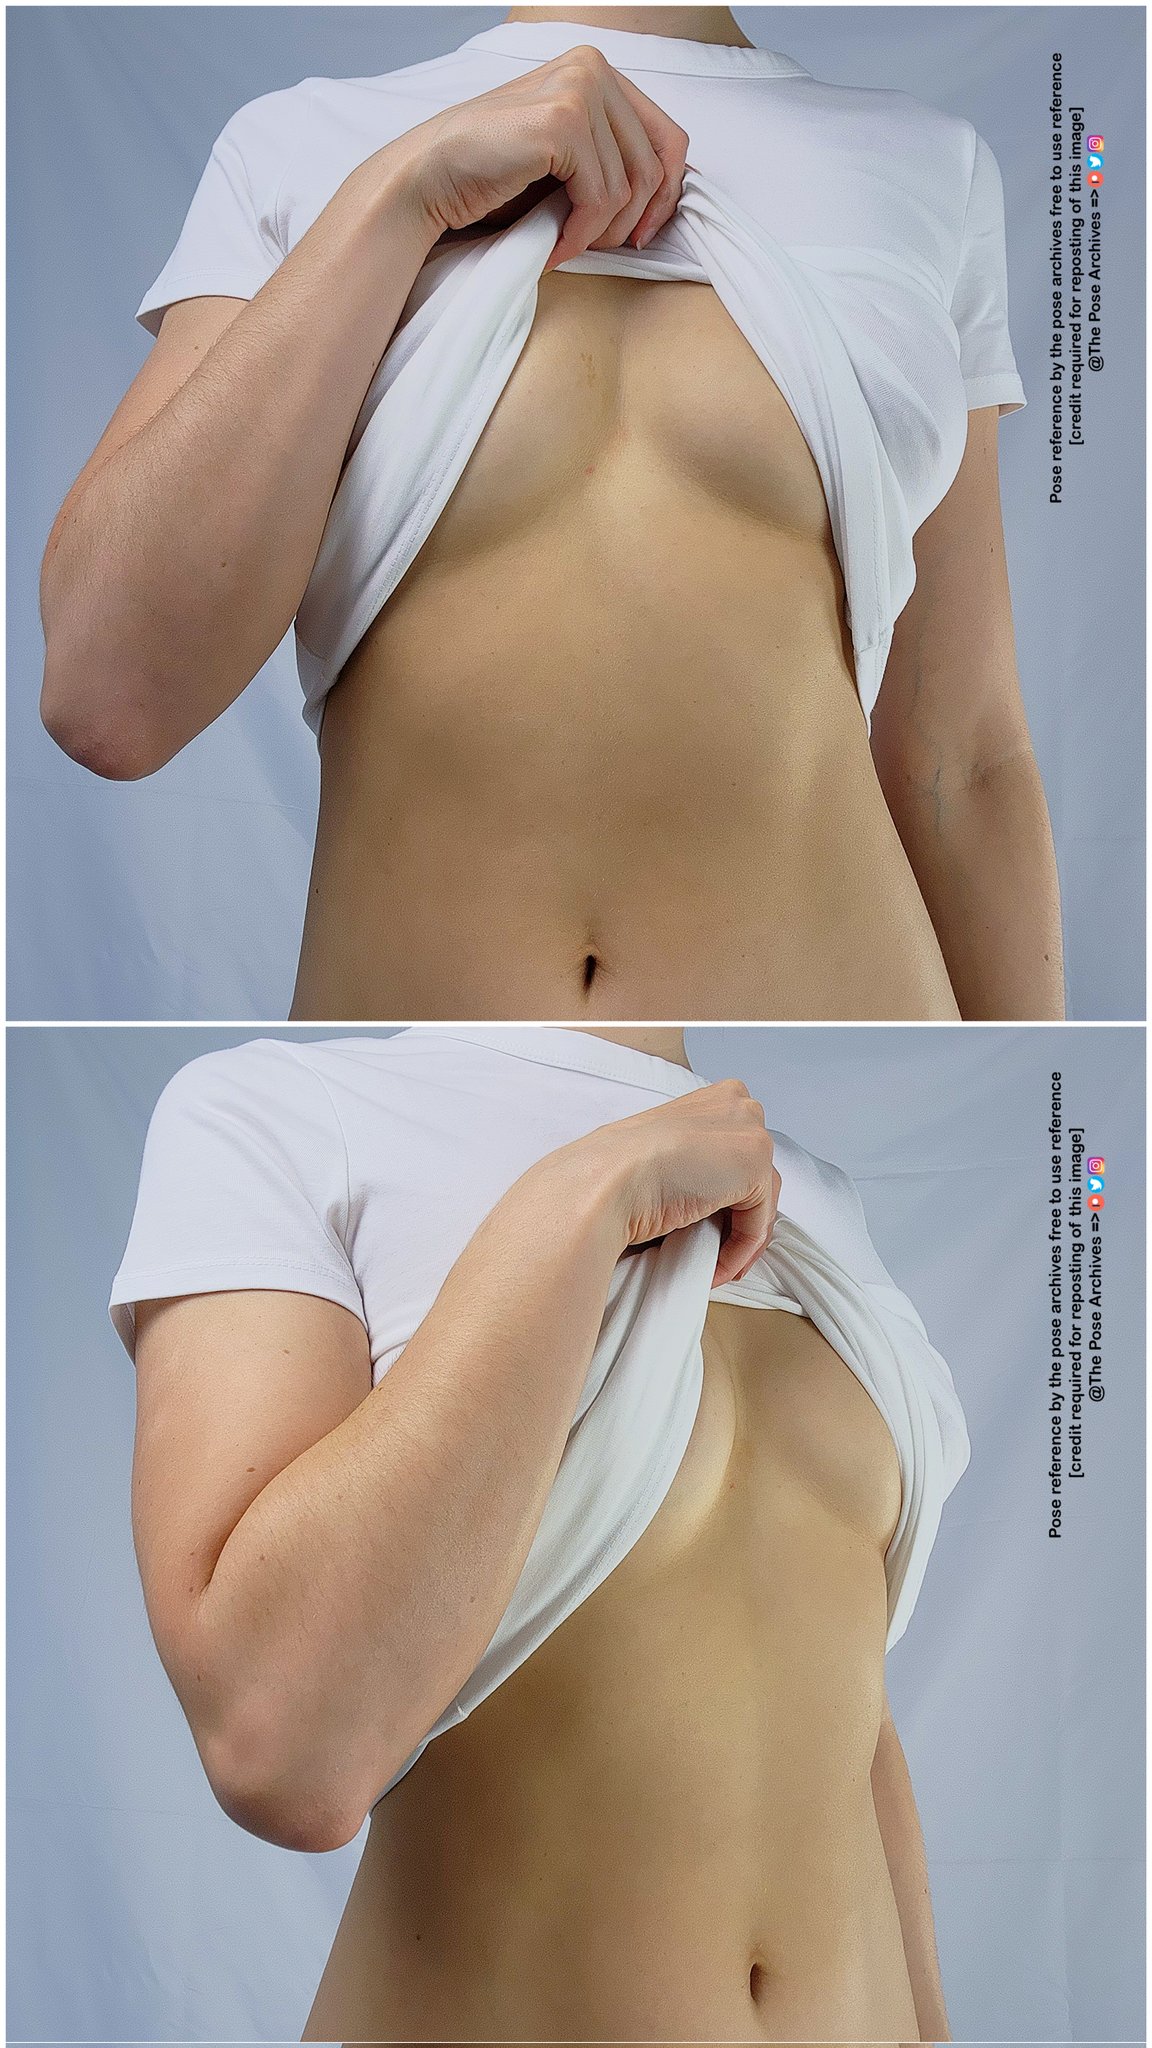 Female Lifting T-shirt Up Breast Reference by theposearchives on DeviantArt